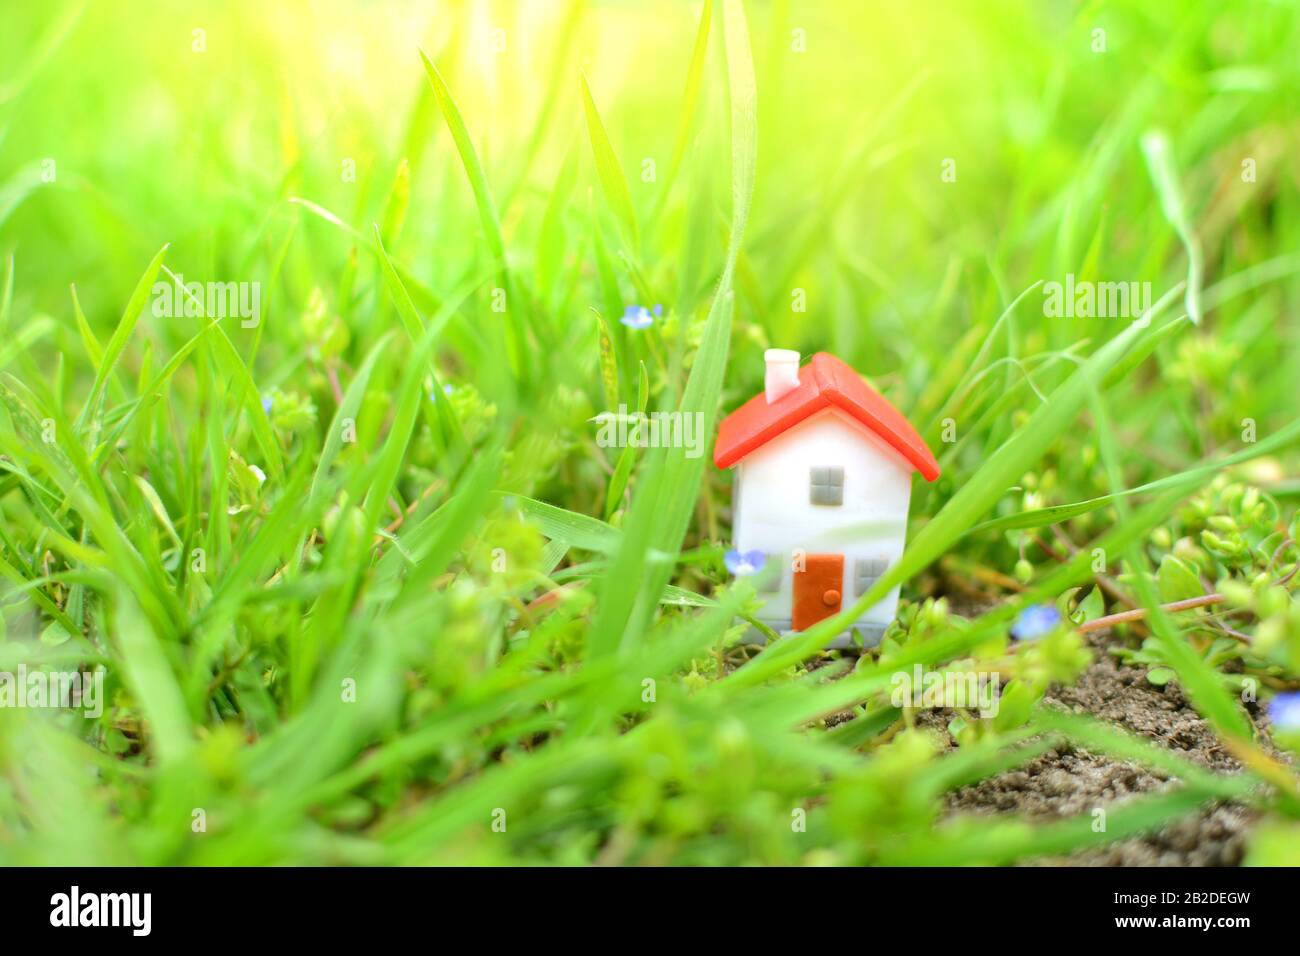 Fantasy concept of a housing. Fairy miniature house and nature. Miniature house in a green grass. Stock Photo